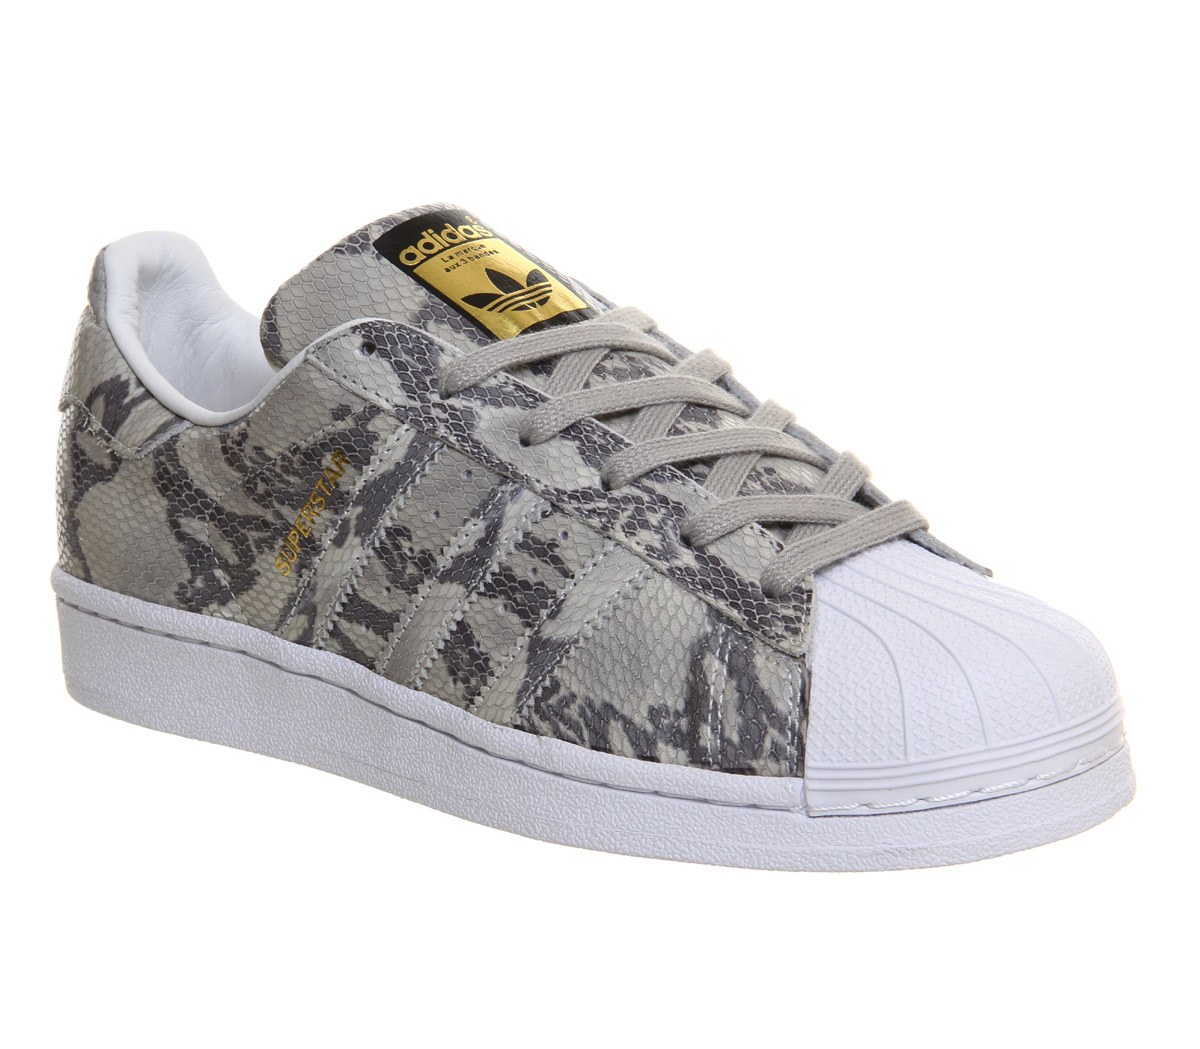 Adidas Superstar 2 Snake Print His Trainers